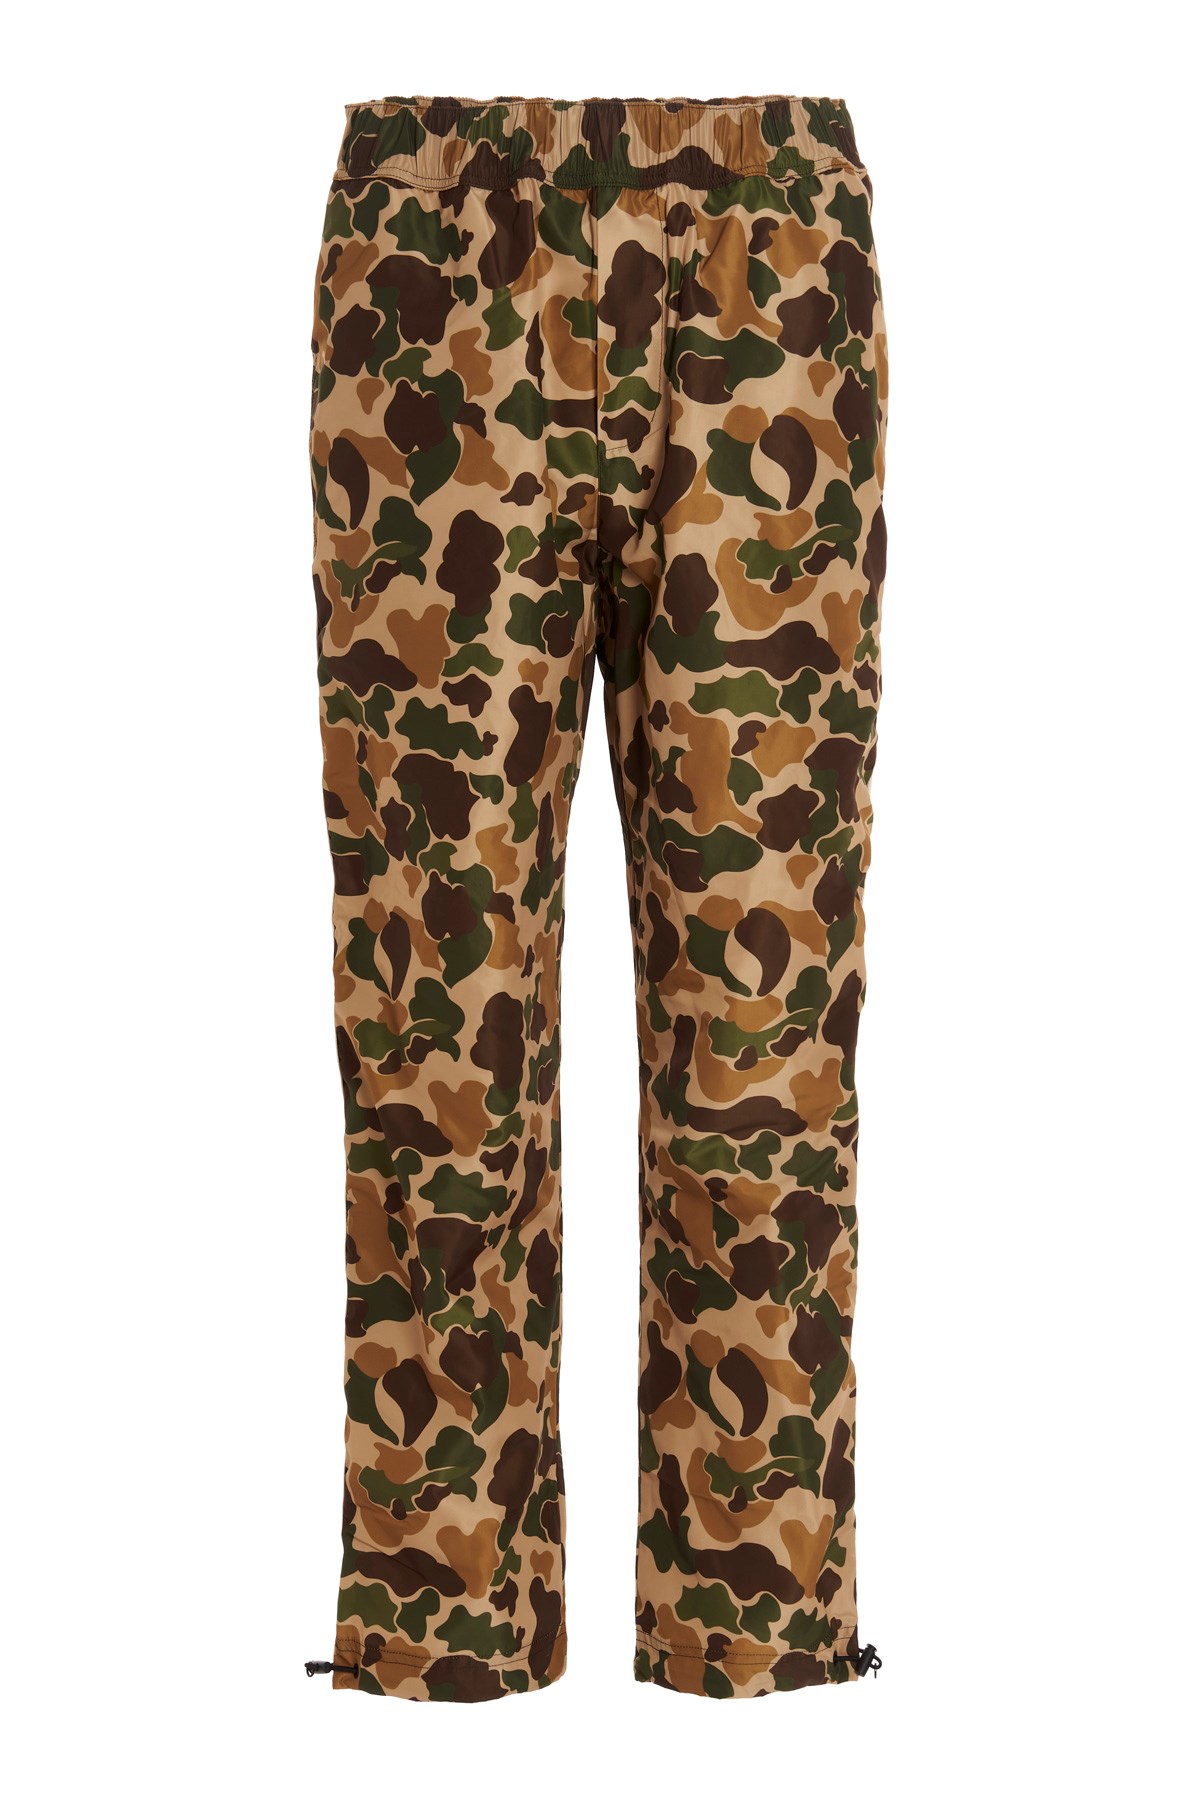 PALM ANGELS Camouflage Joggers